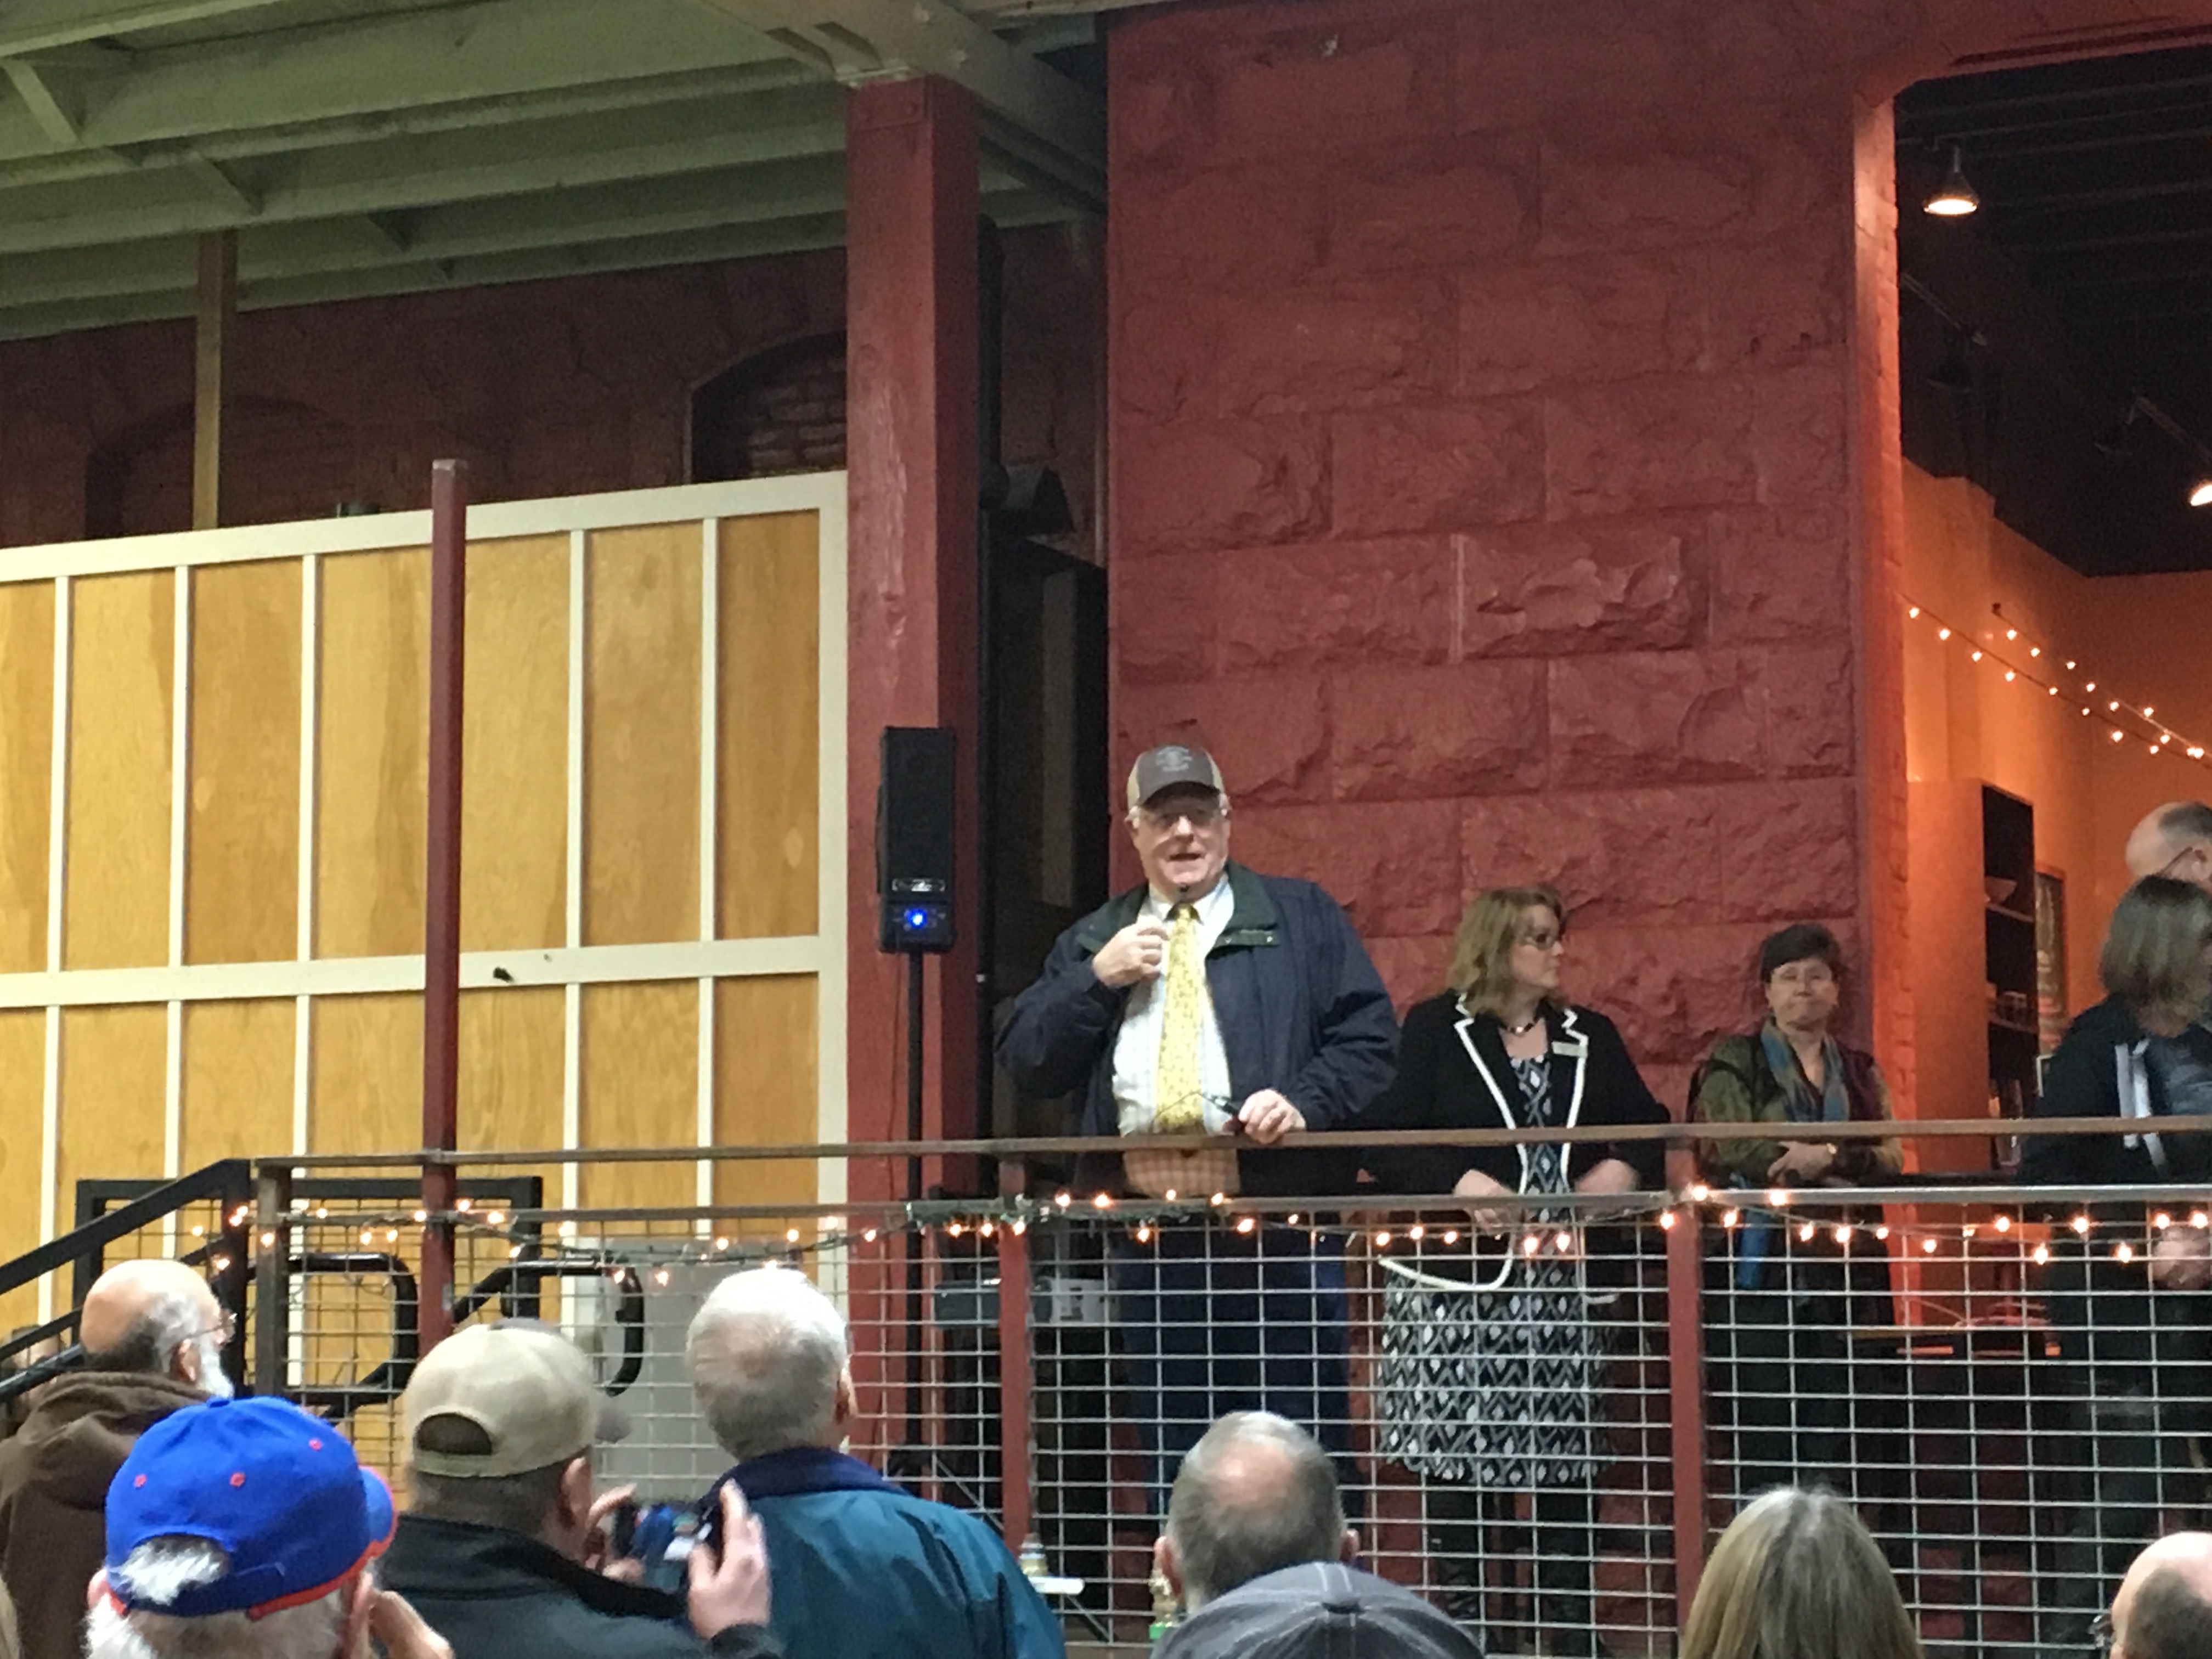 The Dalles Mayor, Steve Lawrence speaking at Freebridge Brewing grand opening.